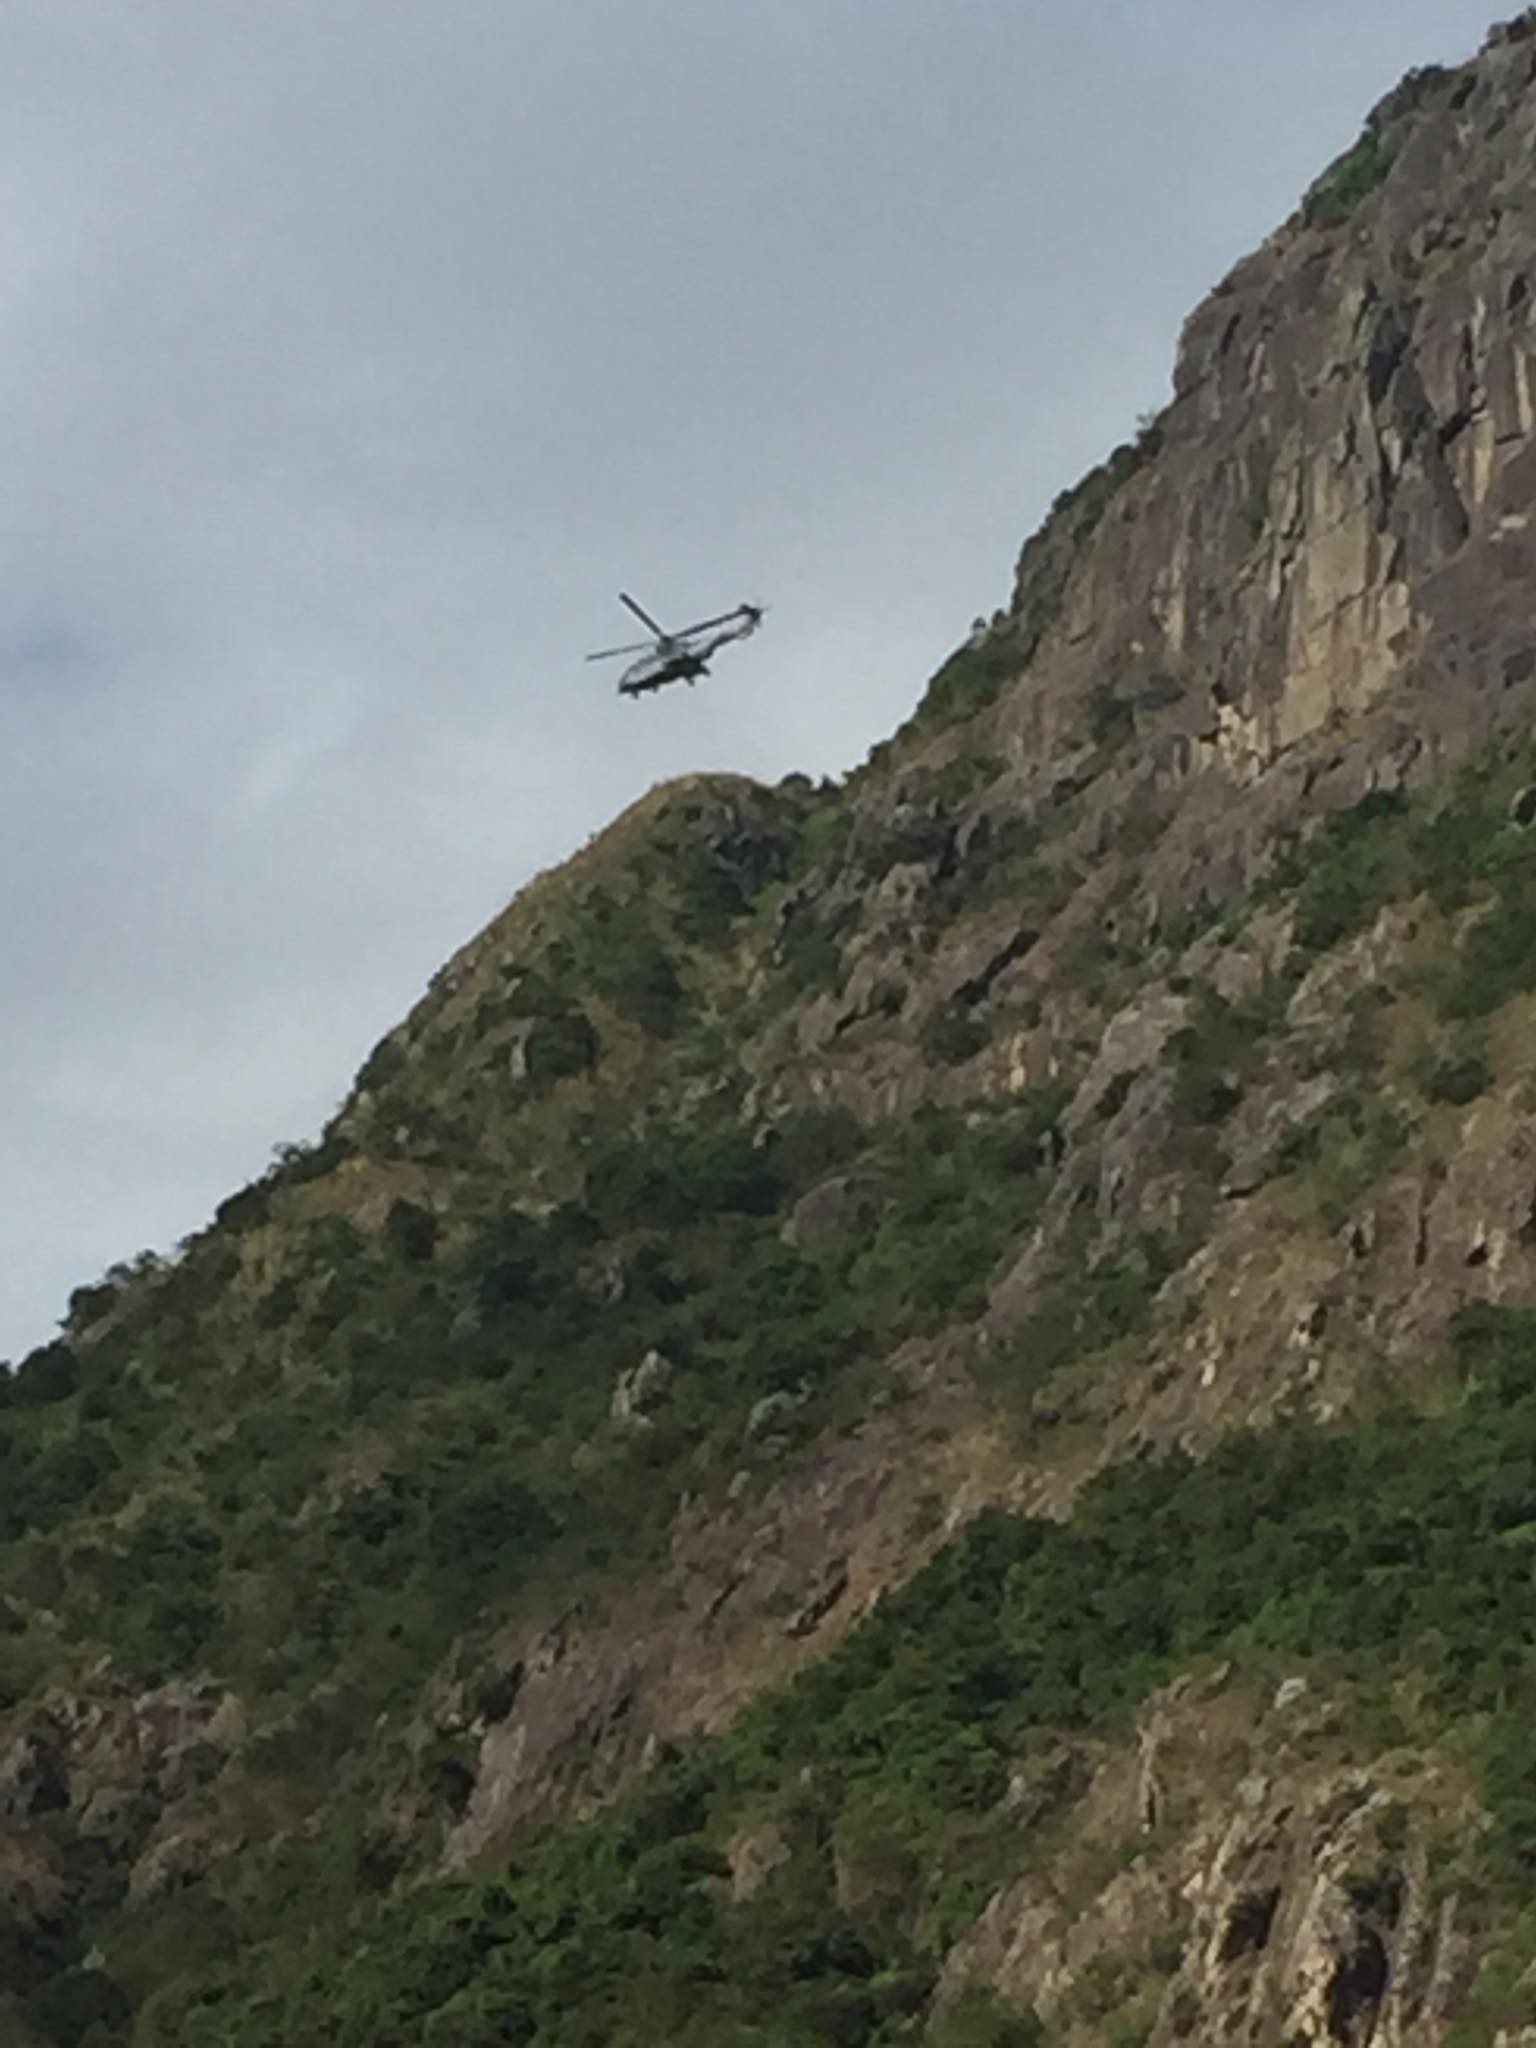 Woman in her 40s was airlifted to hospital after accident at Ma On Shan Country Park